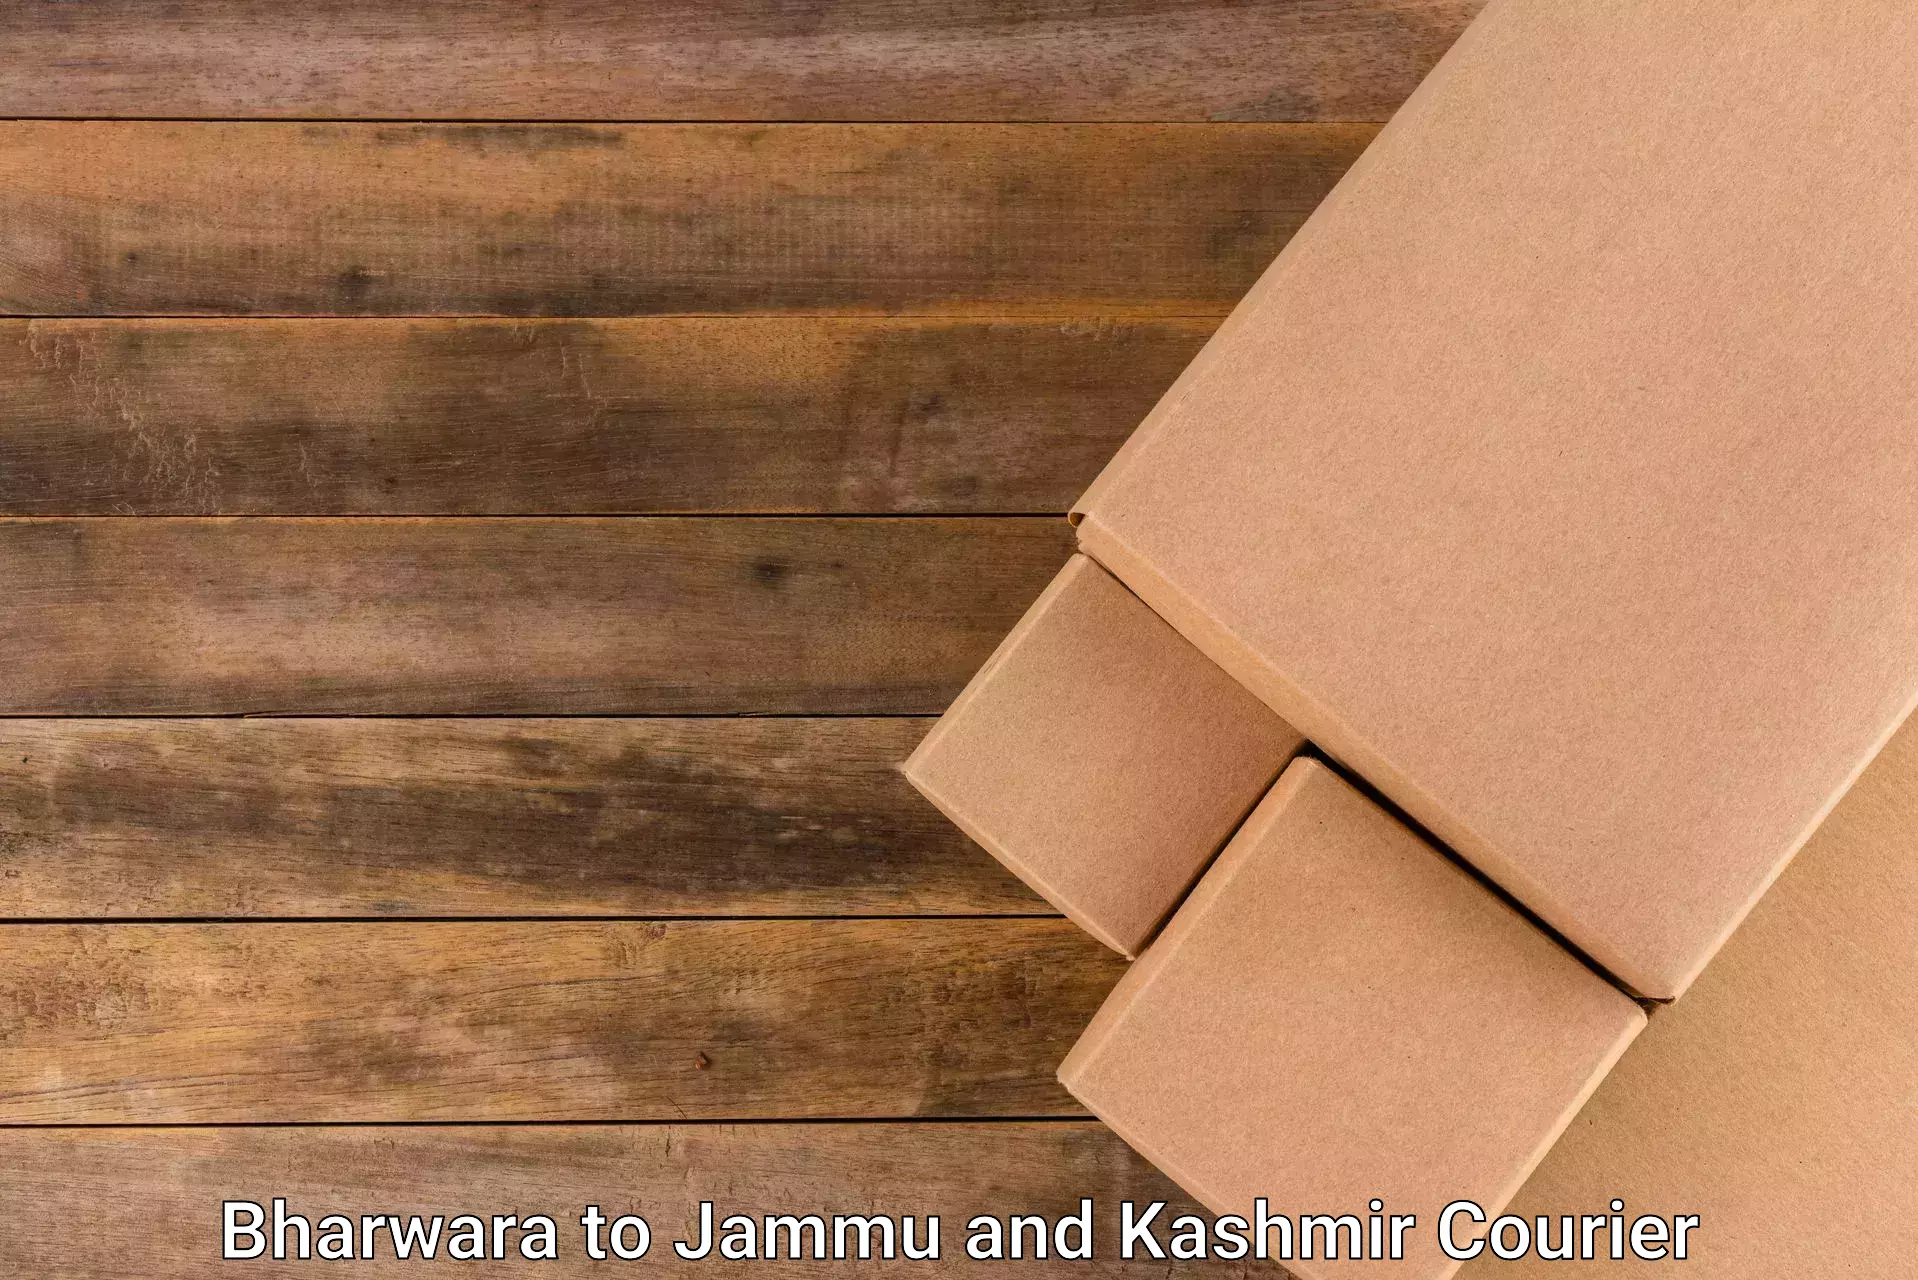 End-to-end delivery in Bharwara to Katra